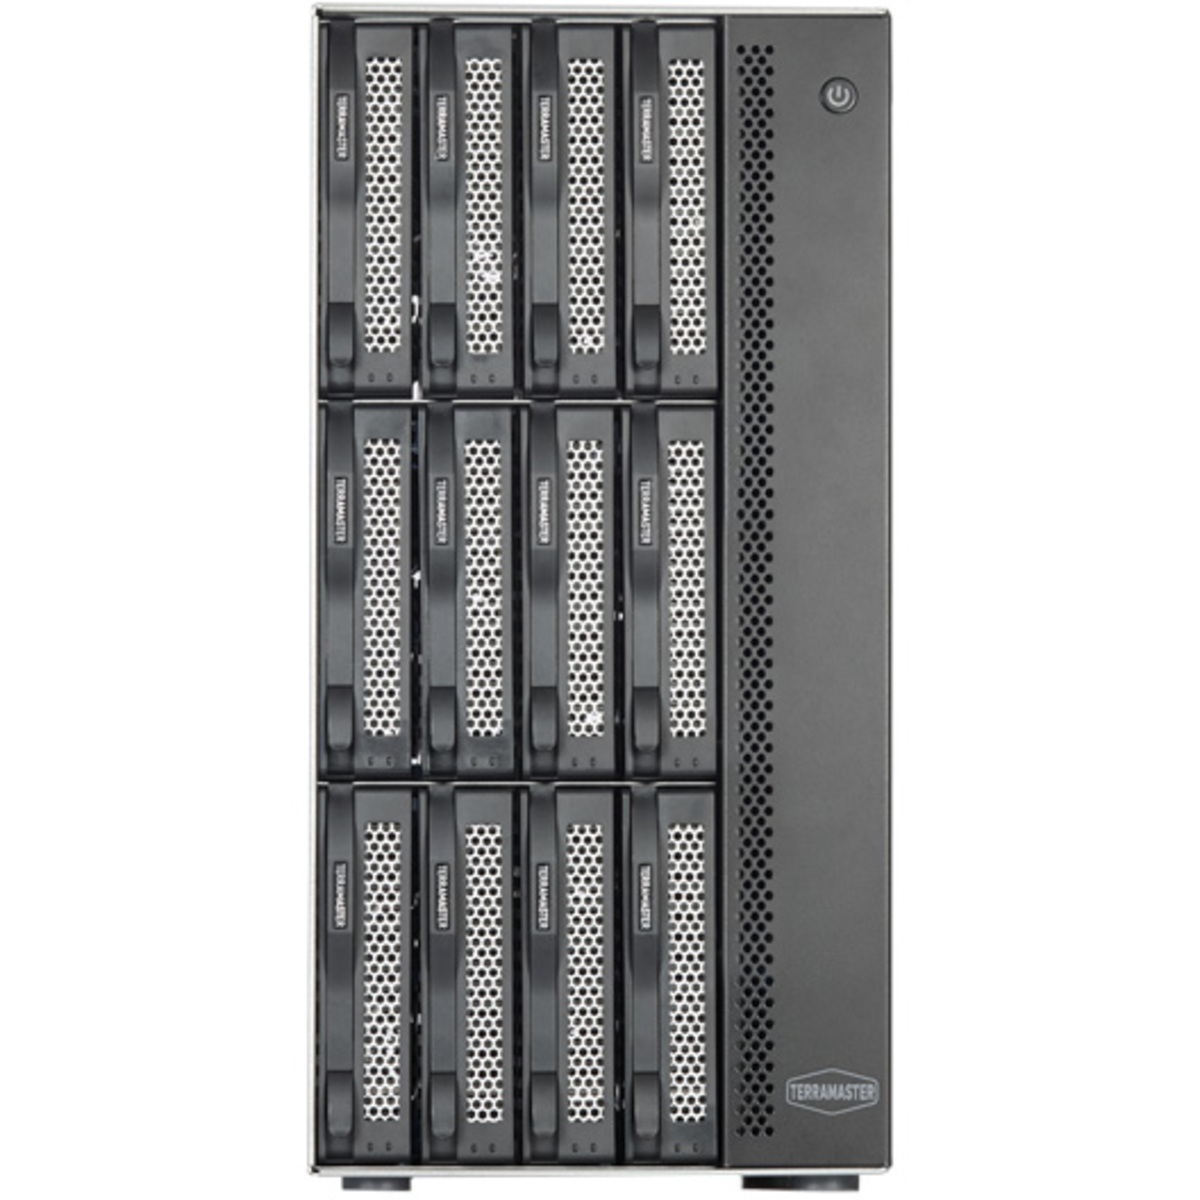 TerraMaster T12-450 48tb 12-Bay Desktop Multimedia / Power User / Business NAS - Network Attached Storage Device 12x4tb Seagate IronWolf Pro ST4000NT001 3.5 7200rpm SATA 6Gb/s HDD NAS Class Drives Installed - Burn-In Tested T12-450